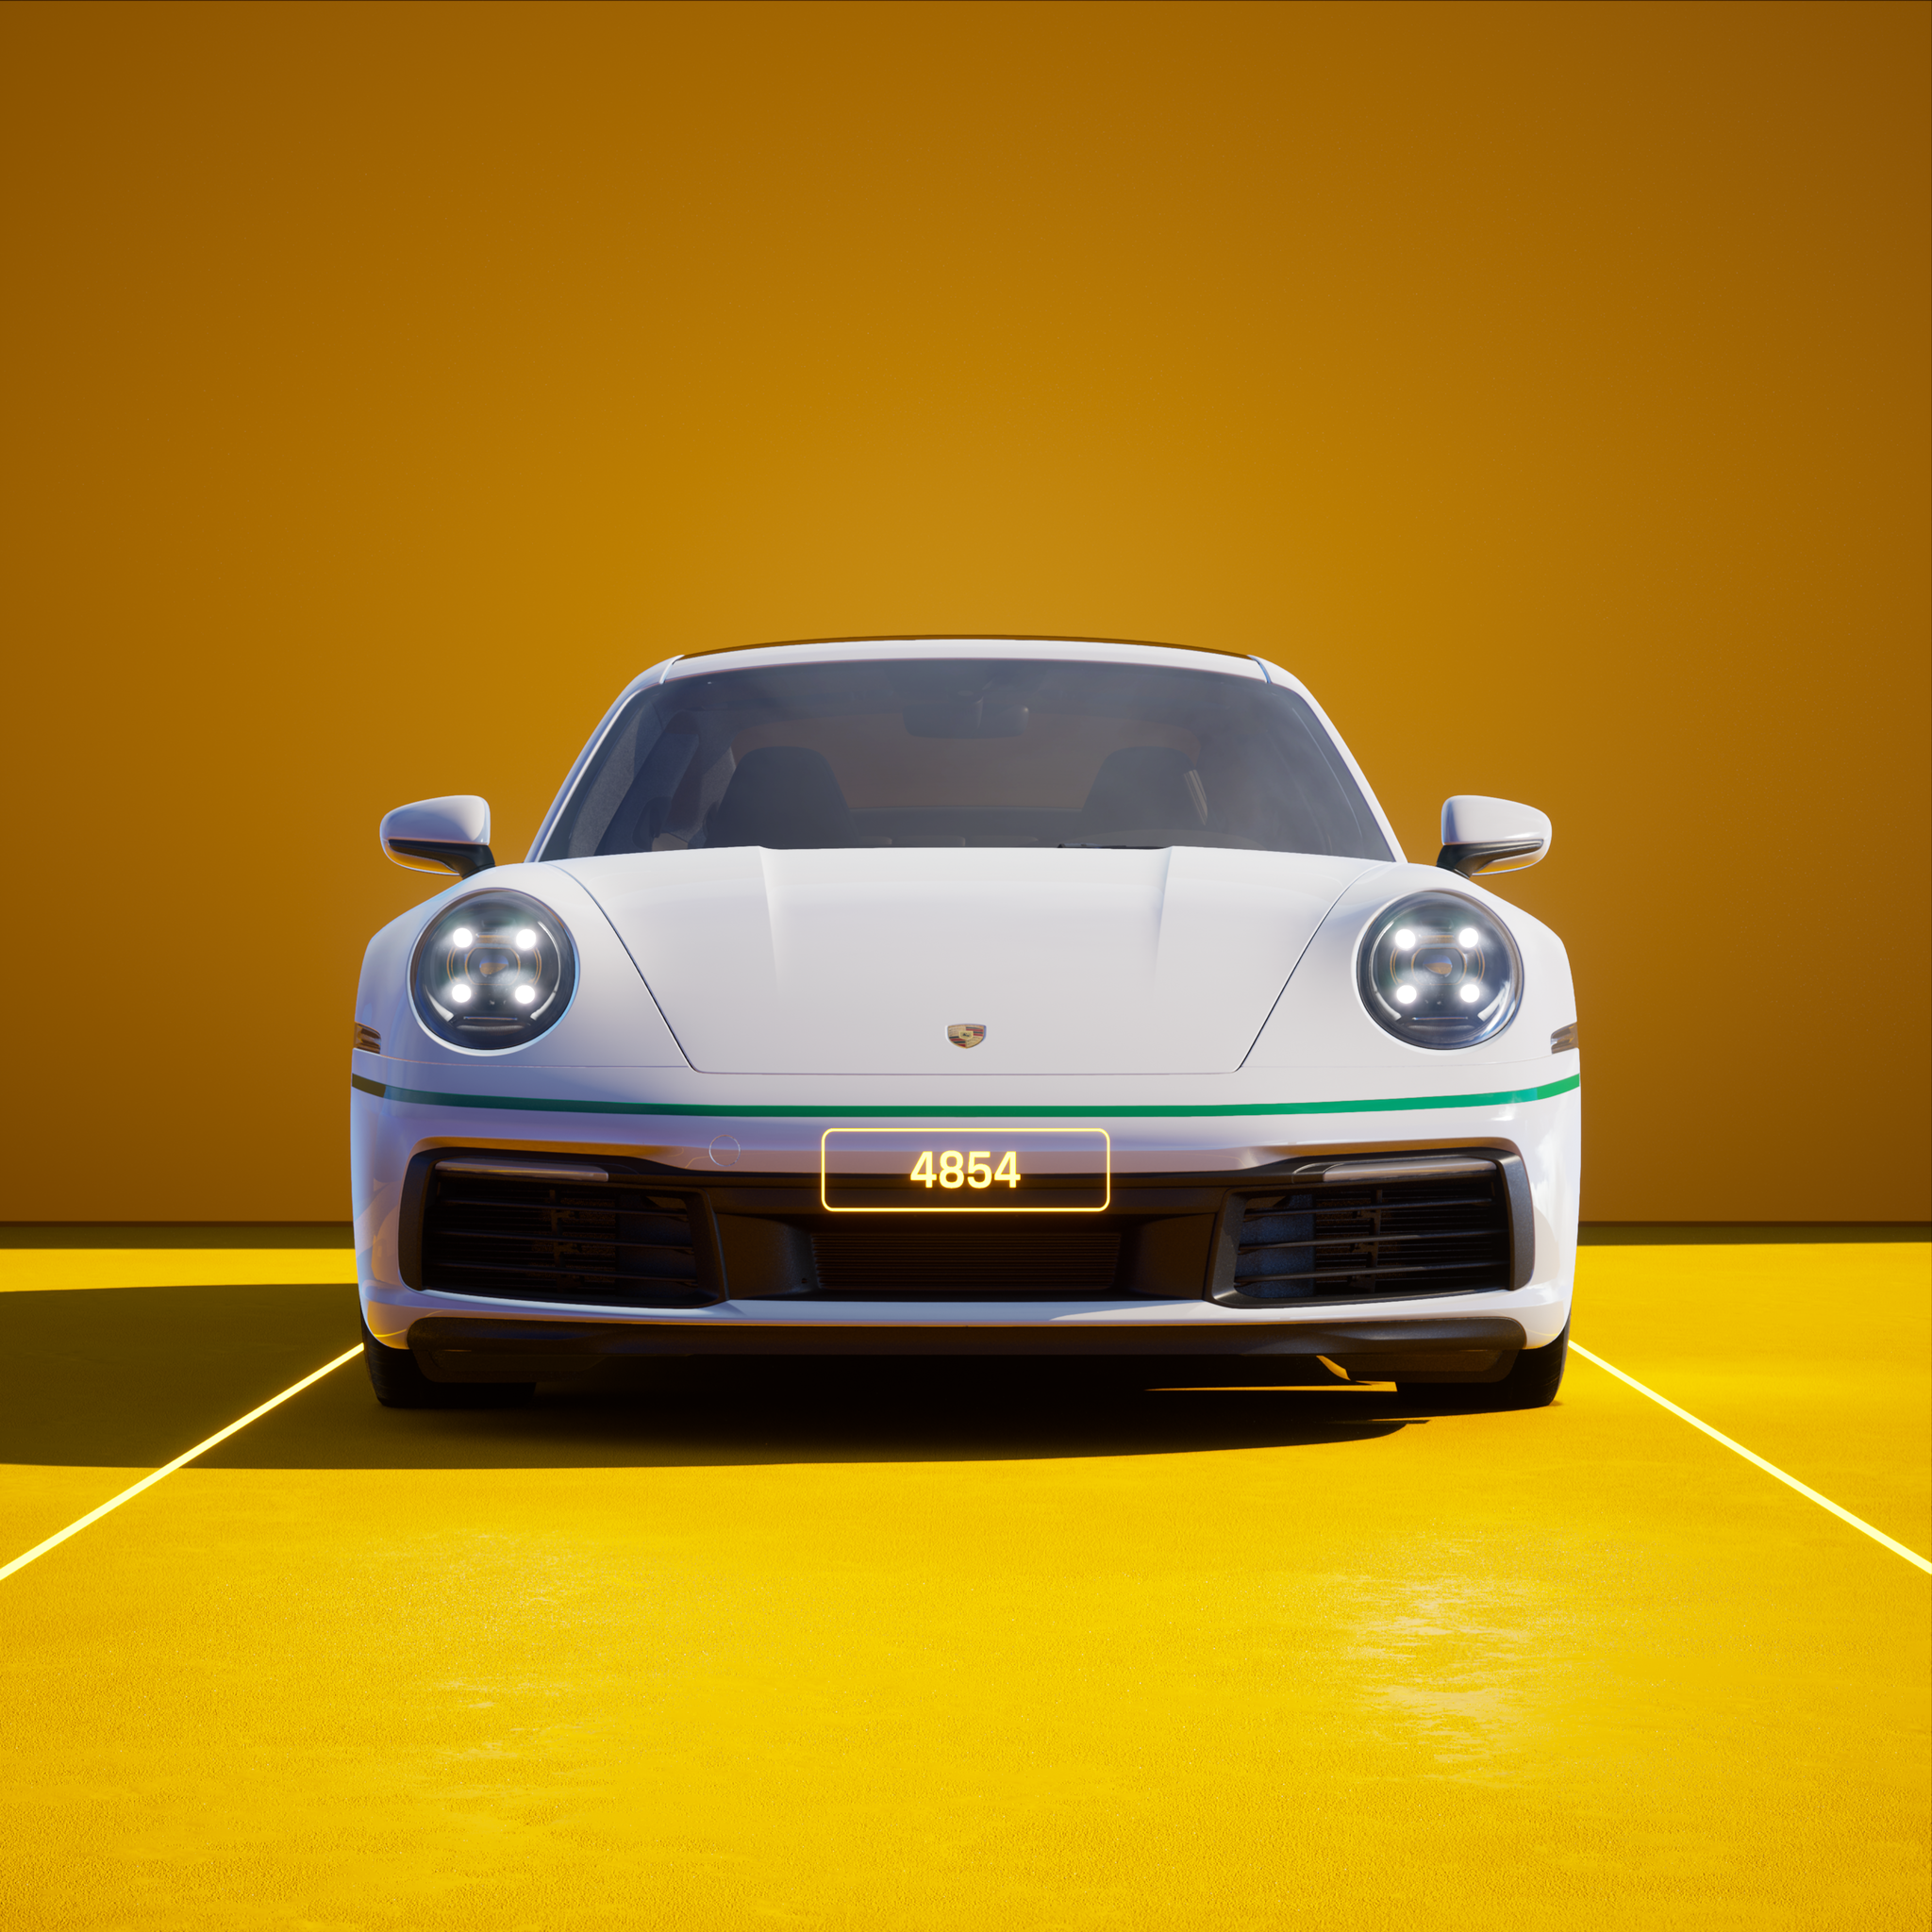 The PORSCHΞ 911 4854 image in phase